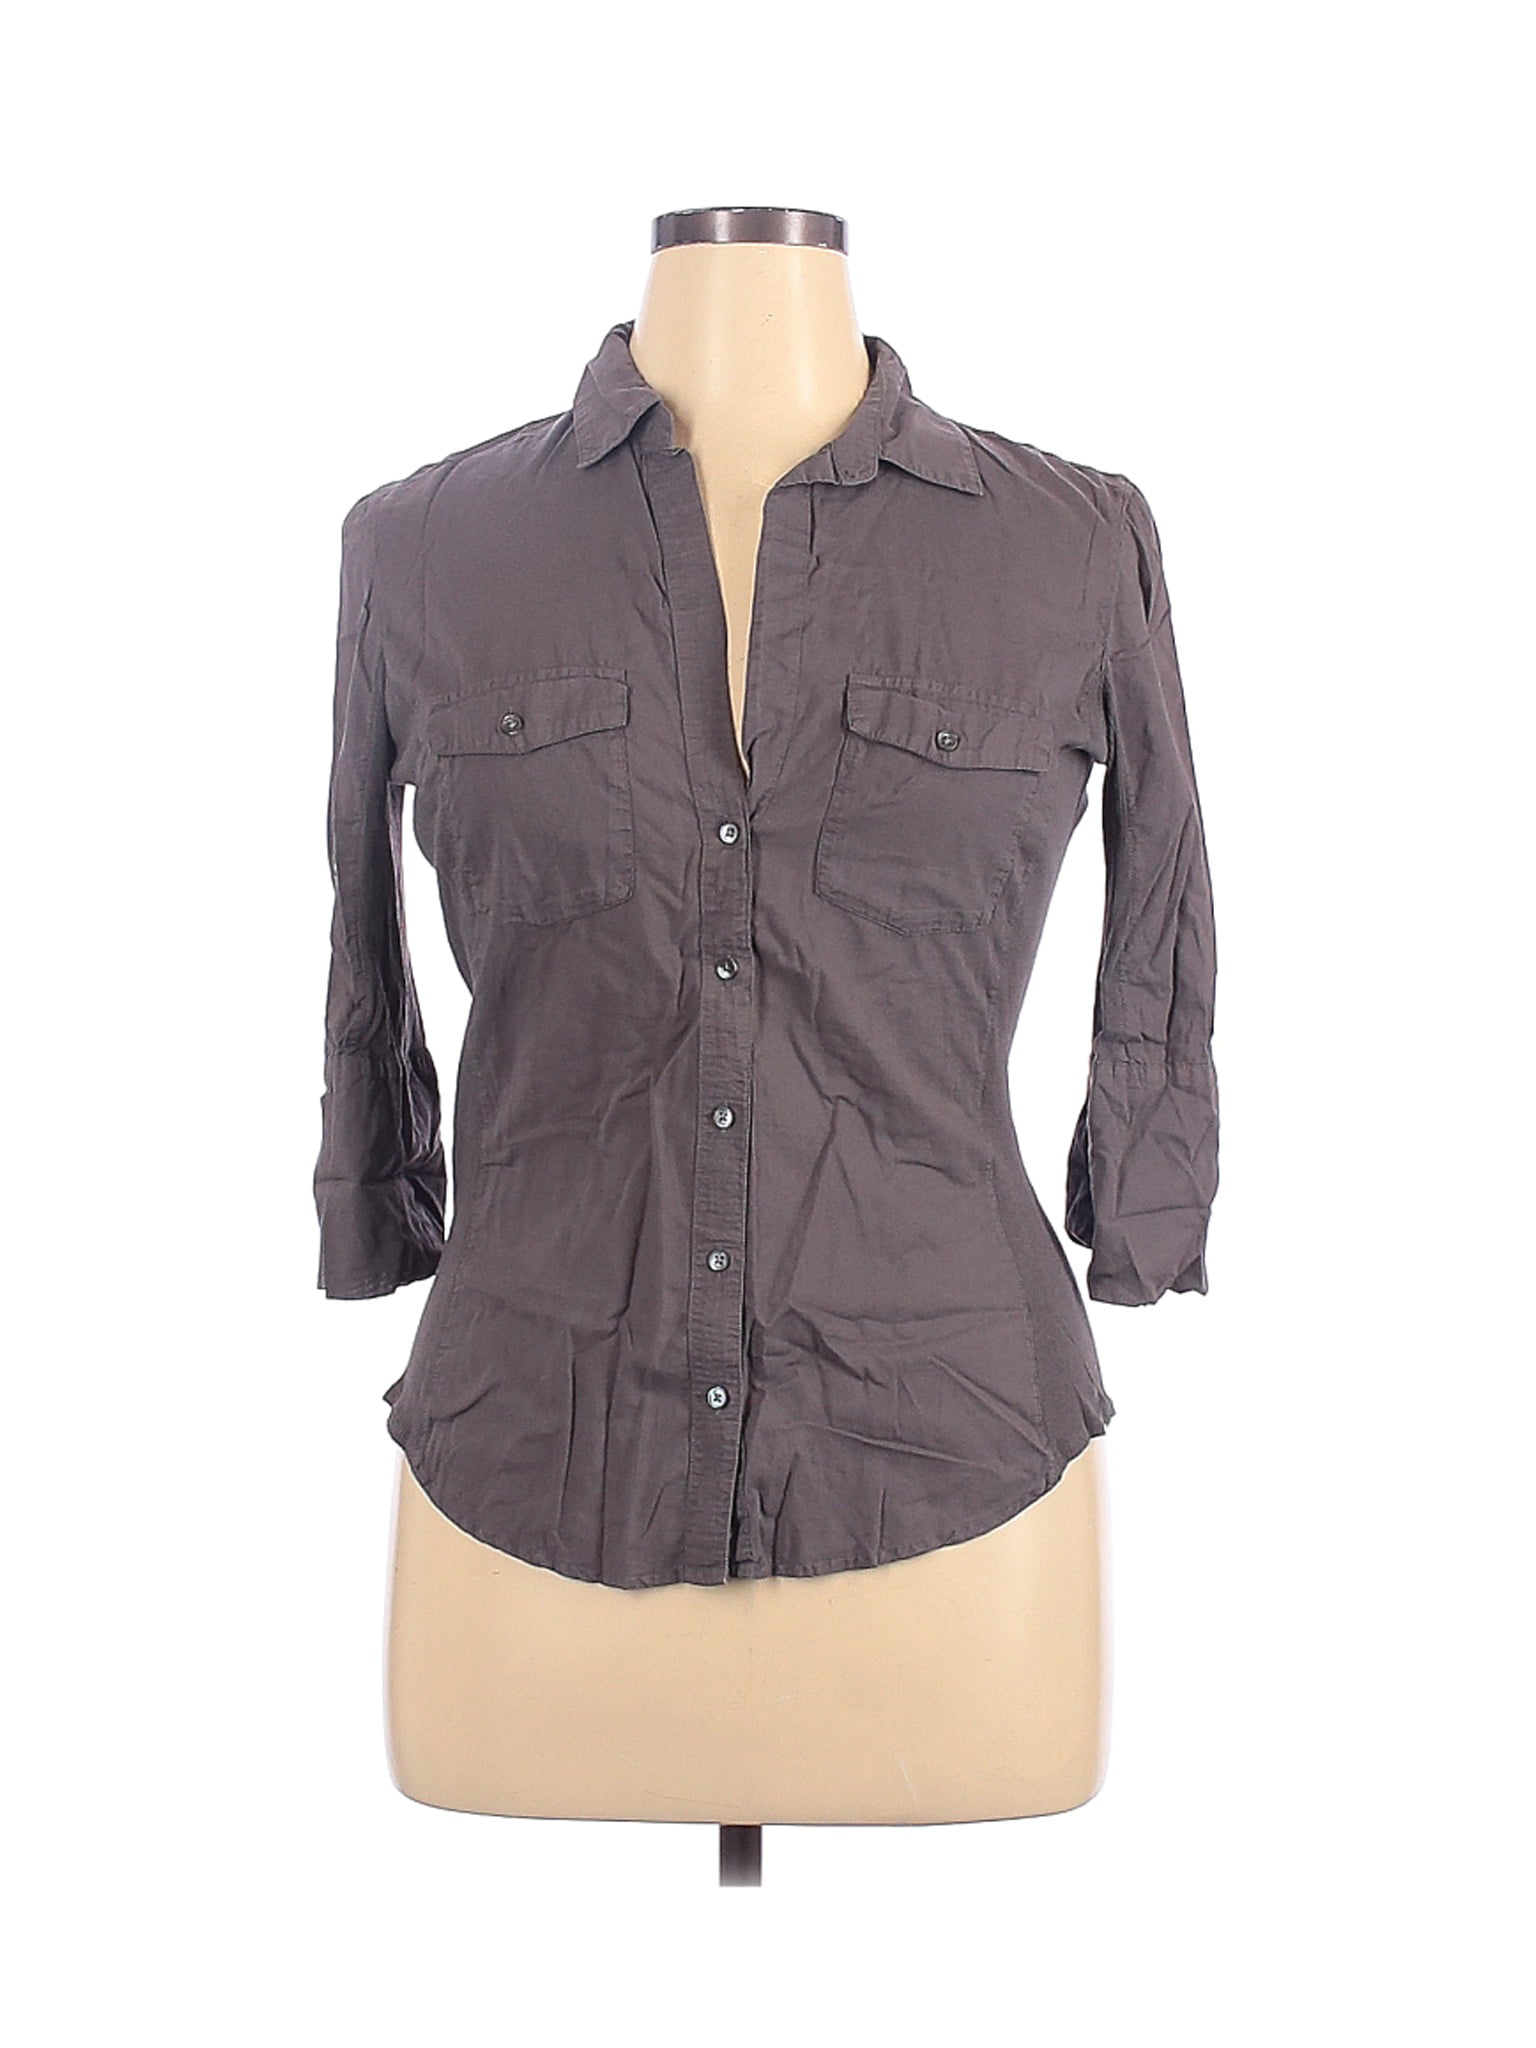 James Perse - Pre-Owned James Perse Women's Size XL 3/4 Sleeve Button ...